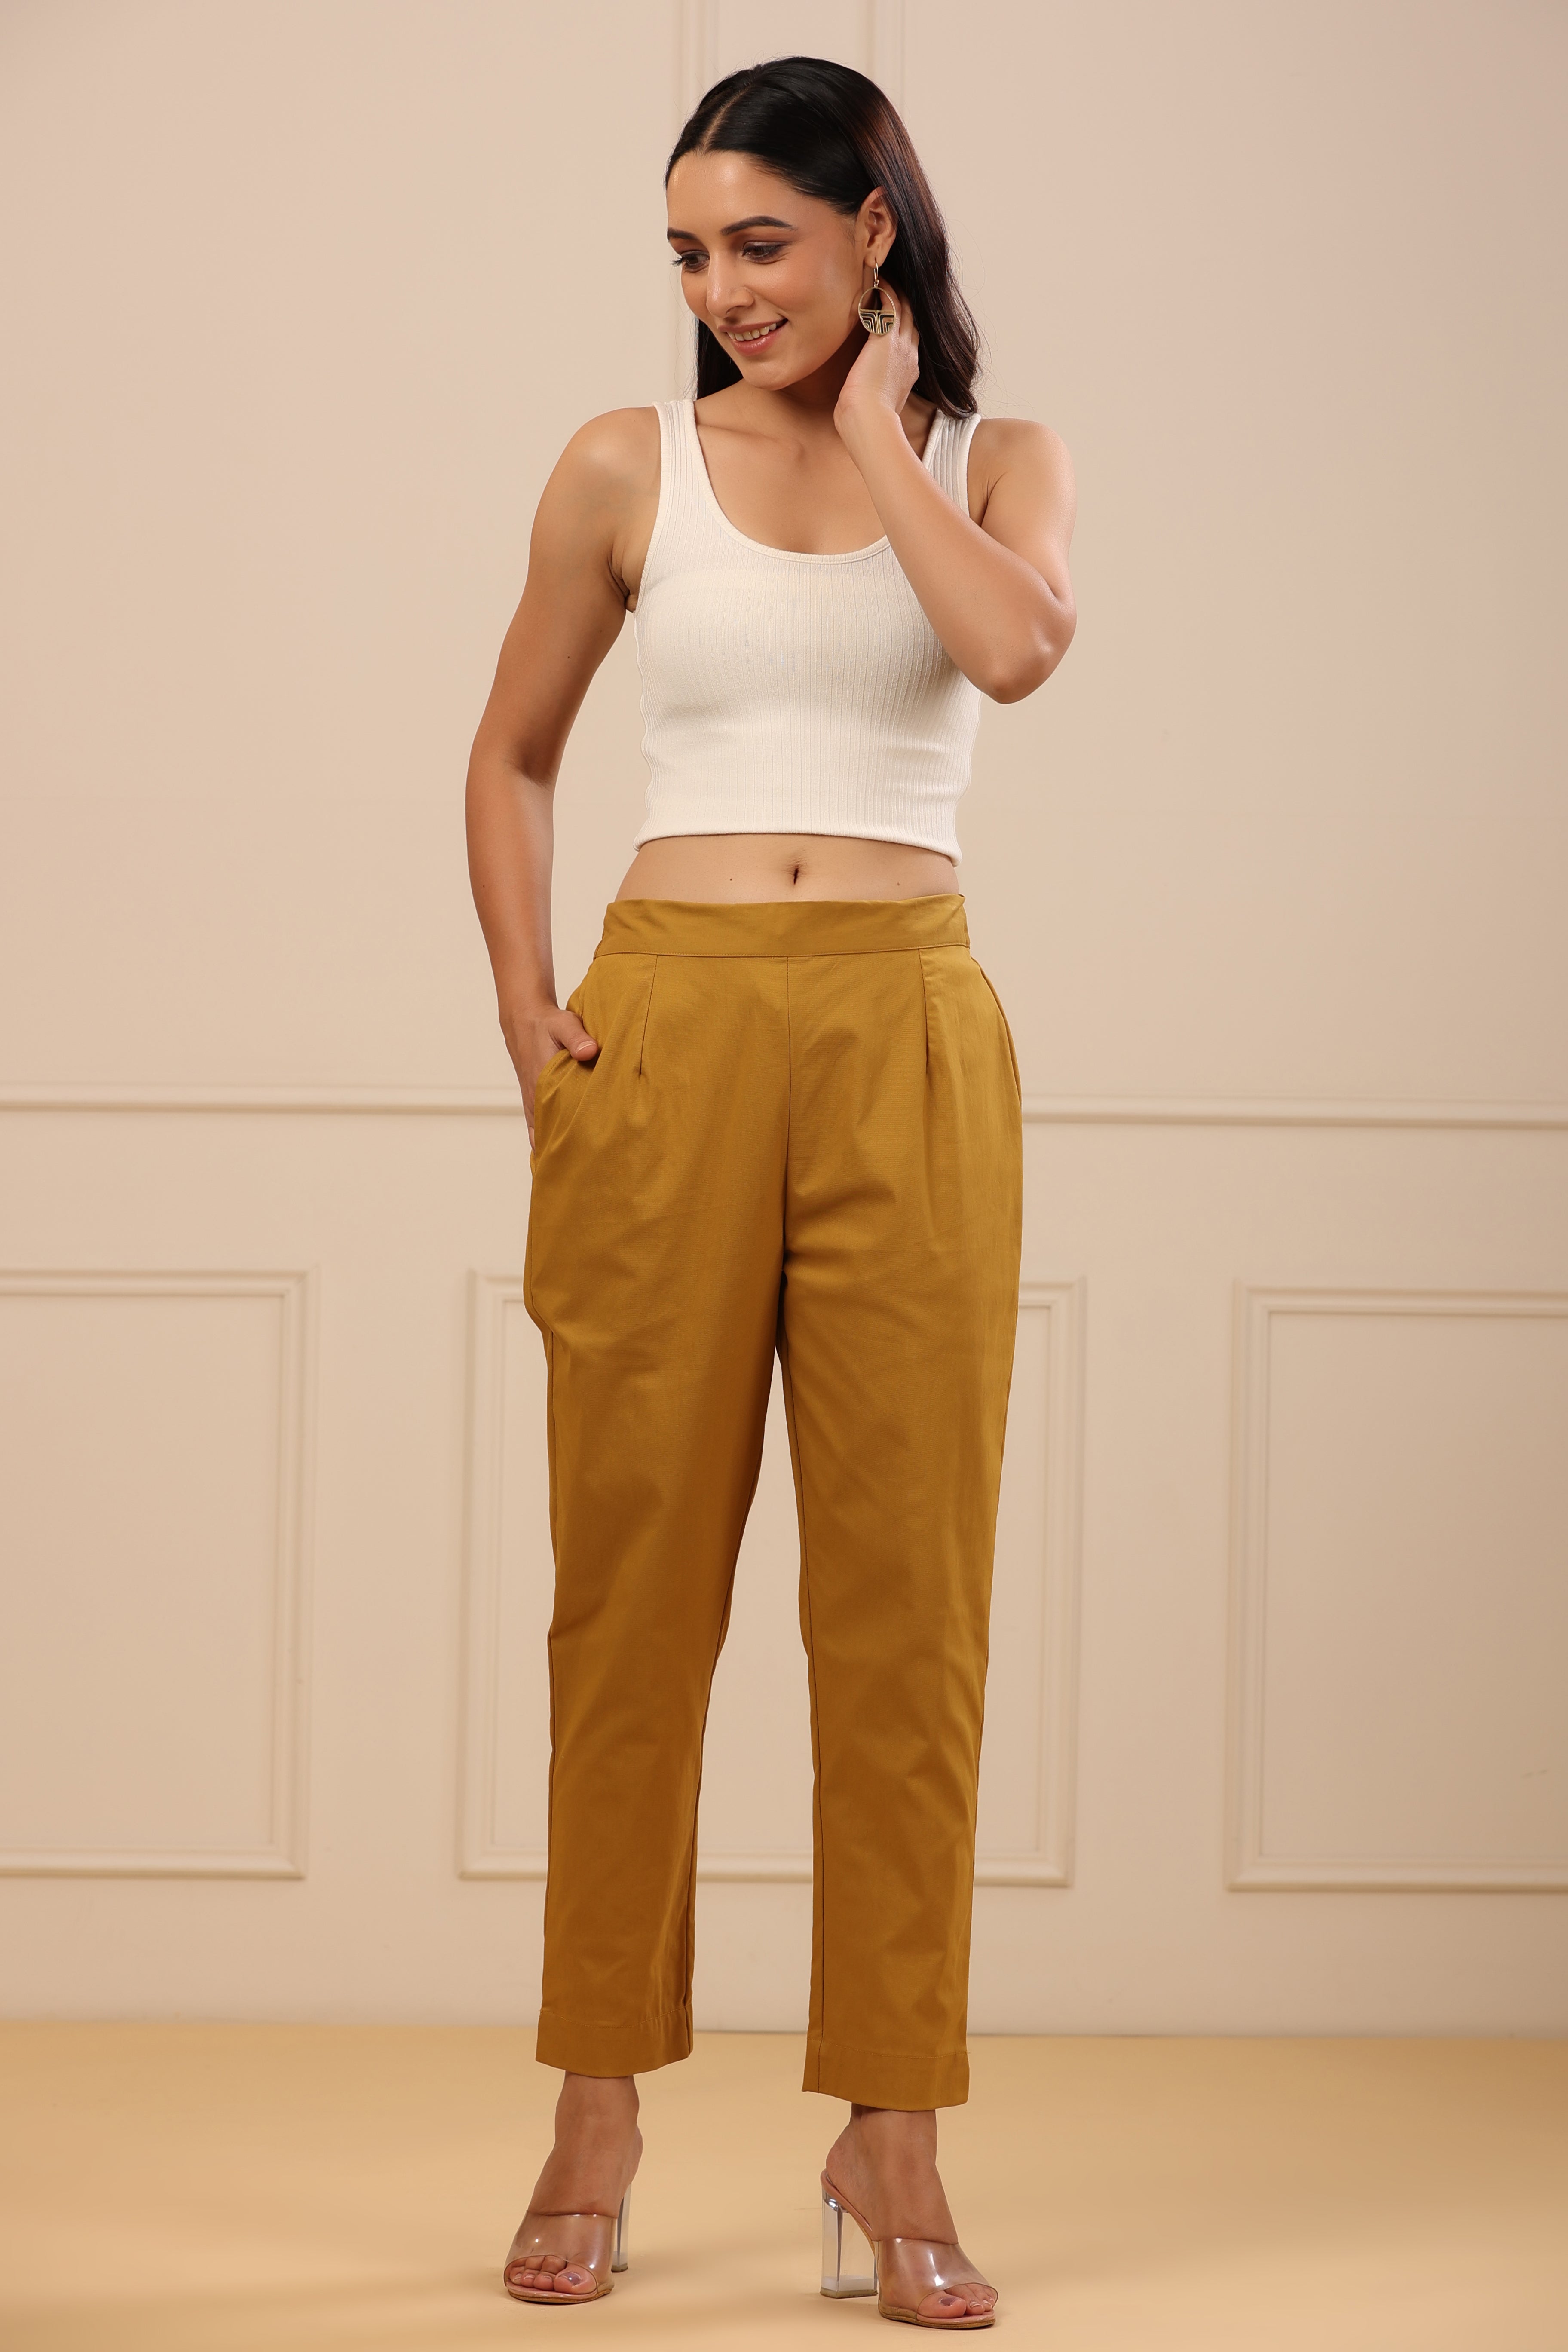 Juniper Mustard Spendex Solid Slim Fit Pants With Partially Elasticated Waistband